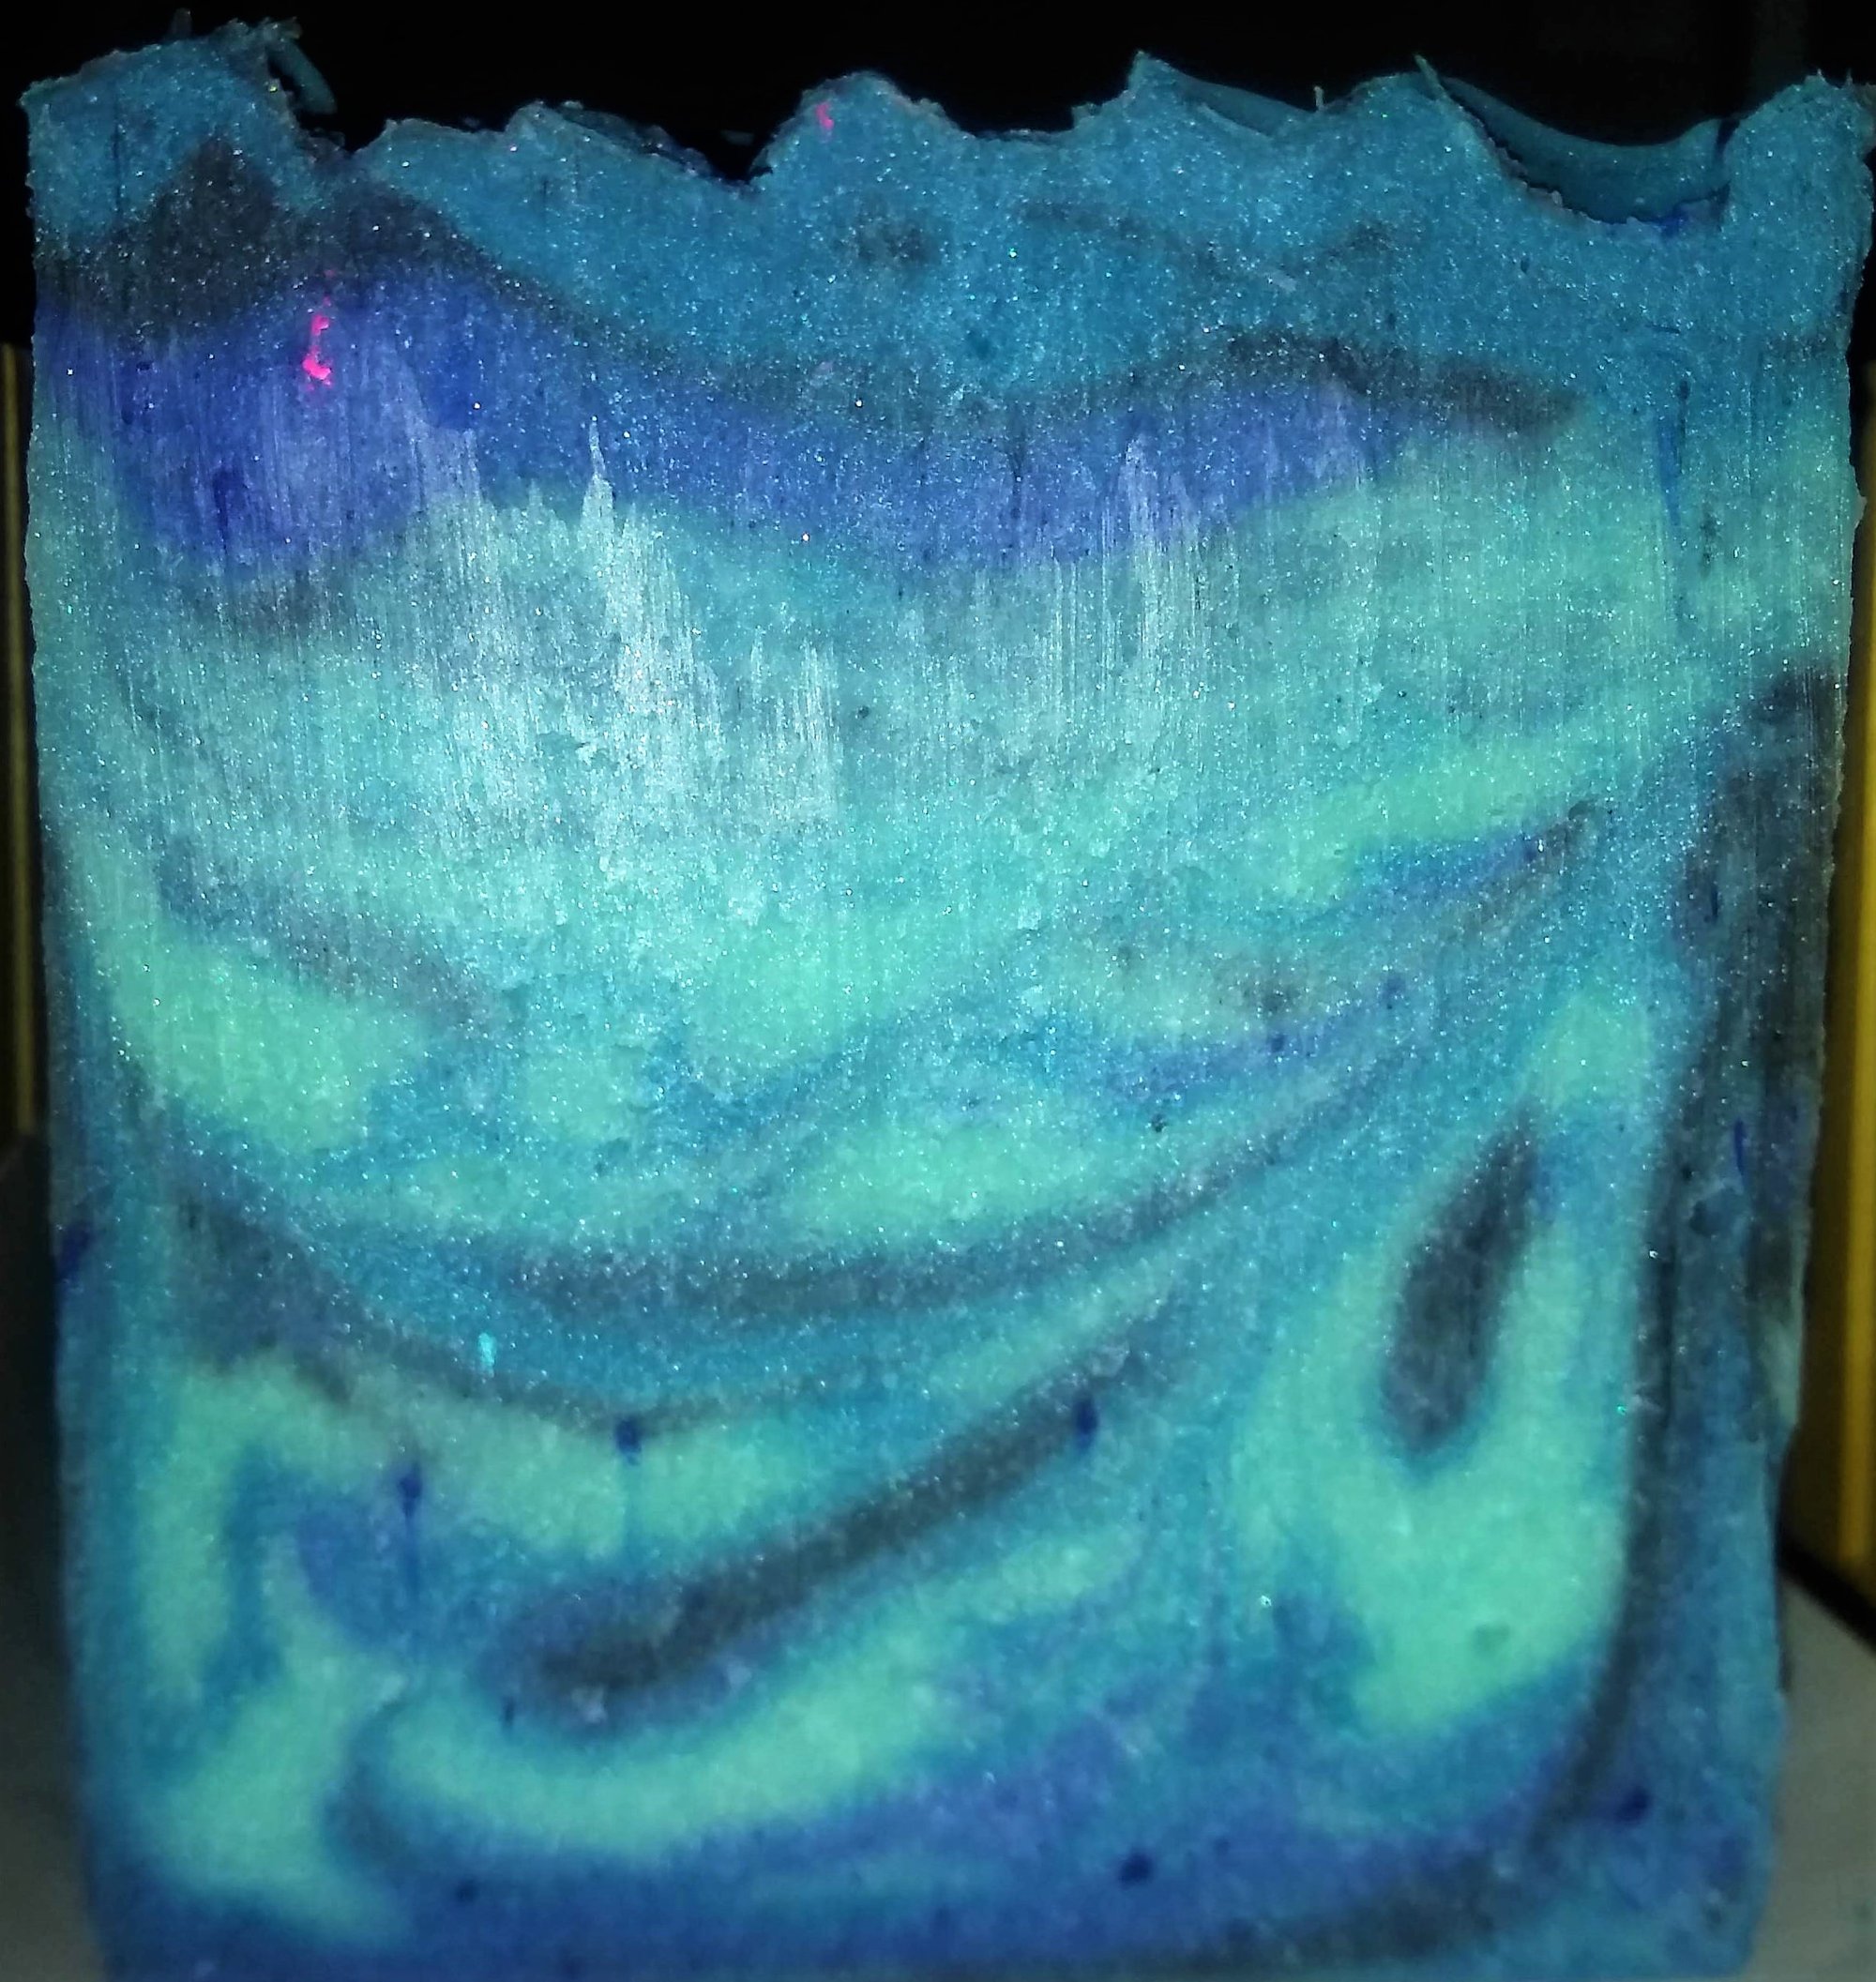 Cool Waters - Fragrance Oil